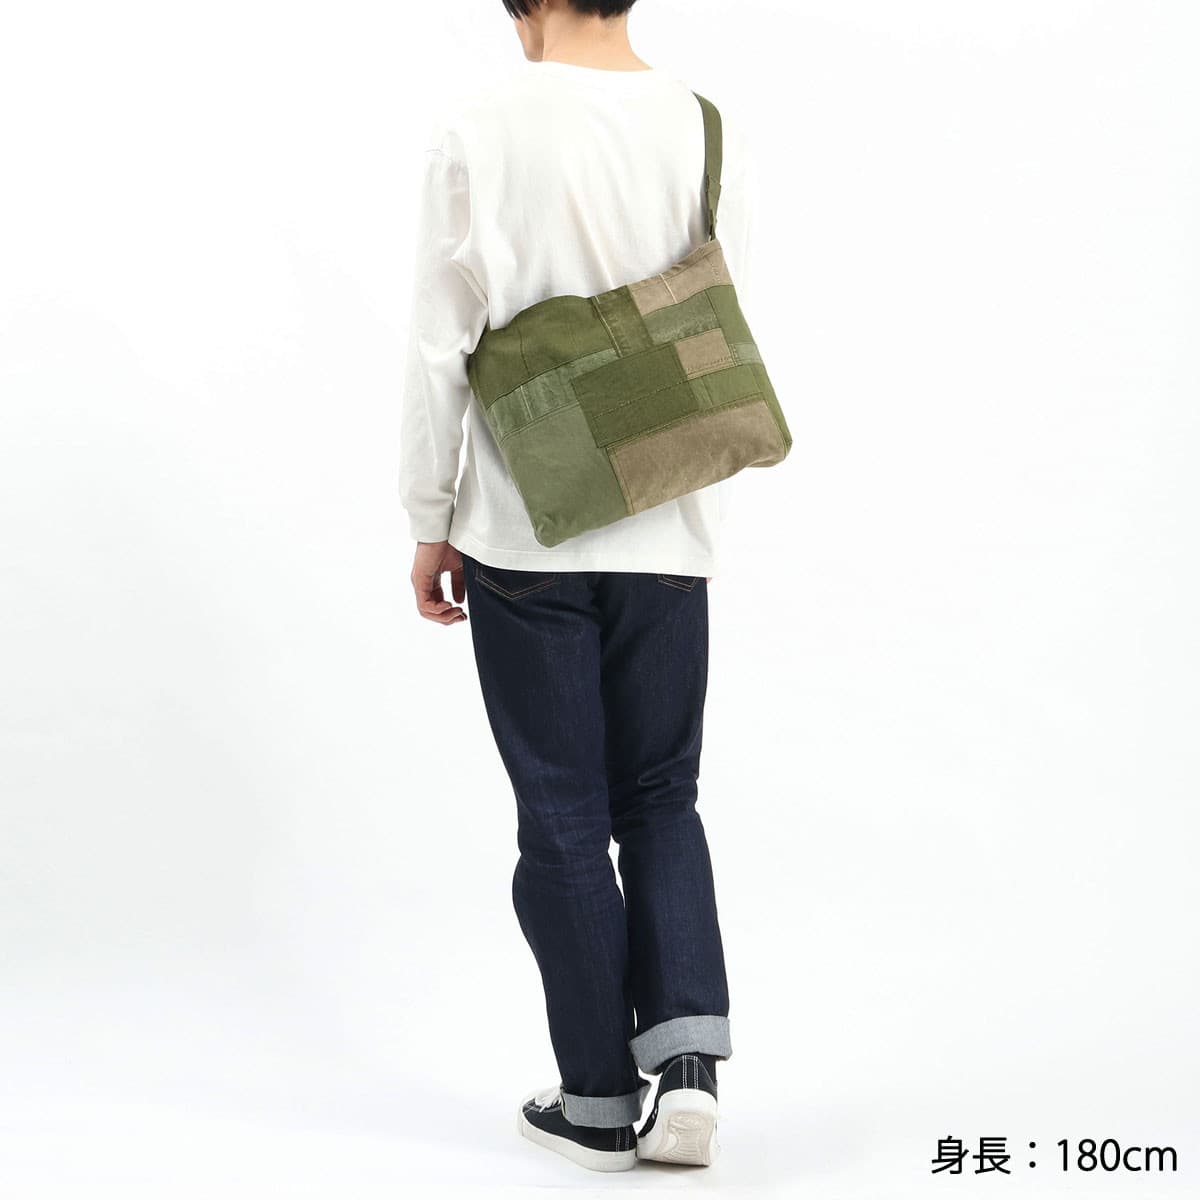 hobo ホーボー DELIVERY BAG UPCYCLED US ARMY CLOTH 7L HB-BG3409 